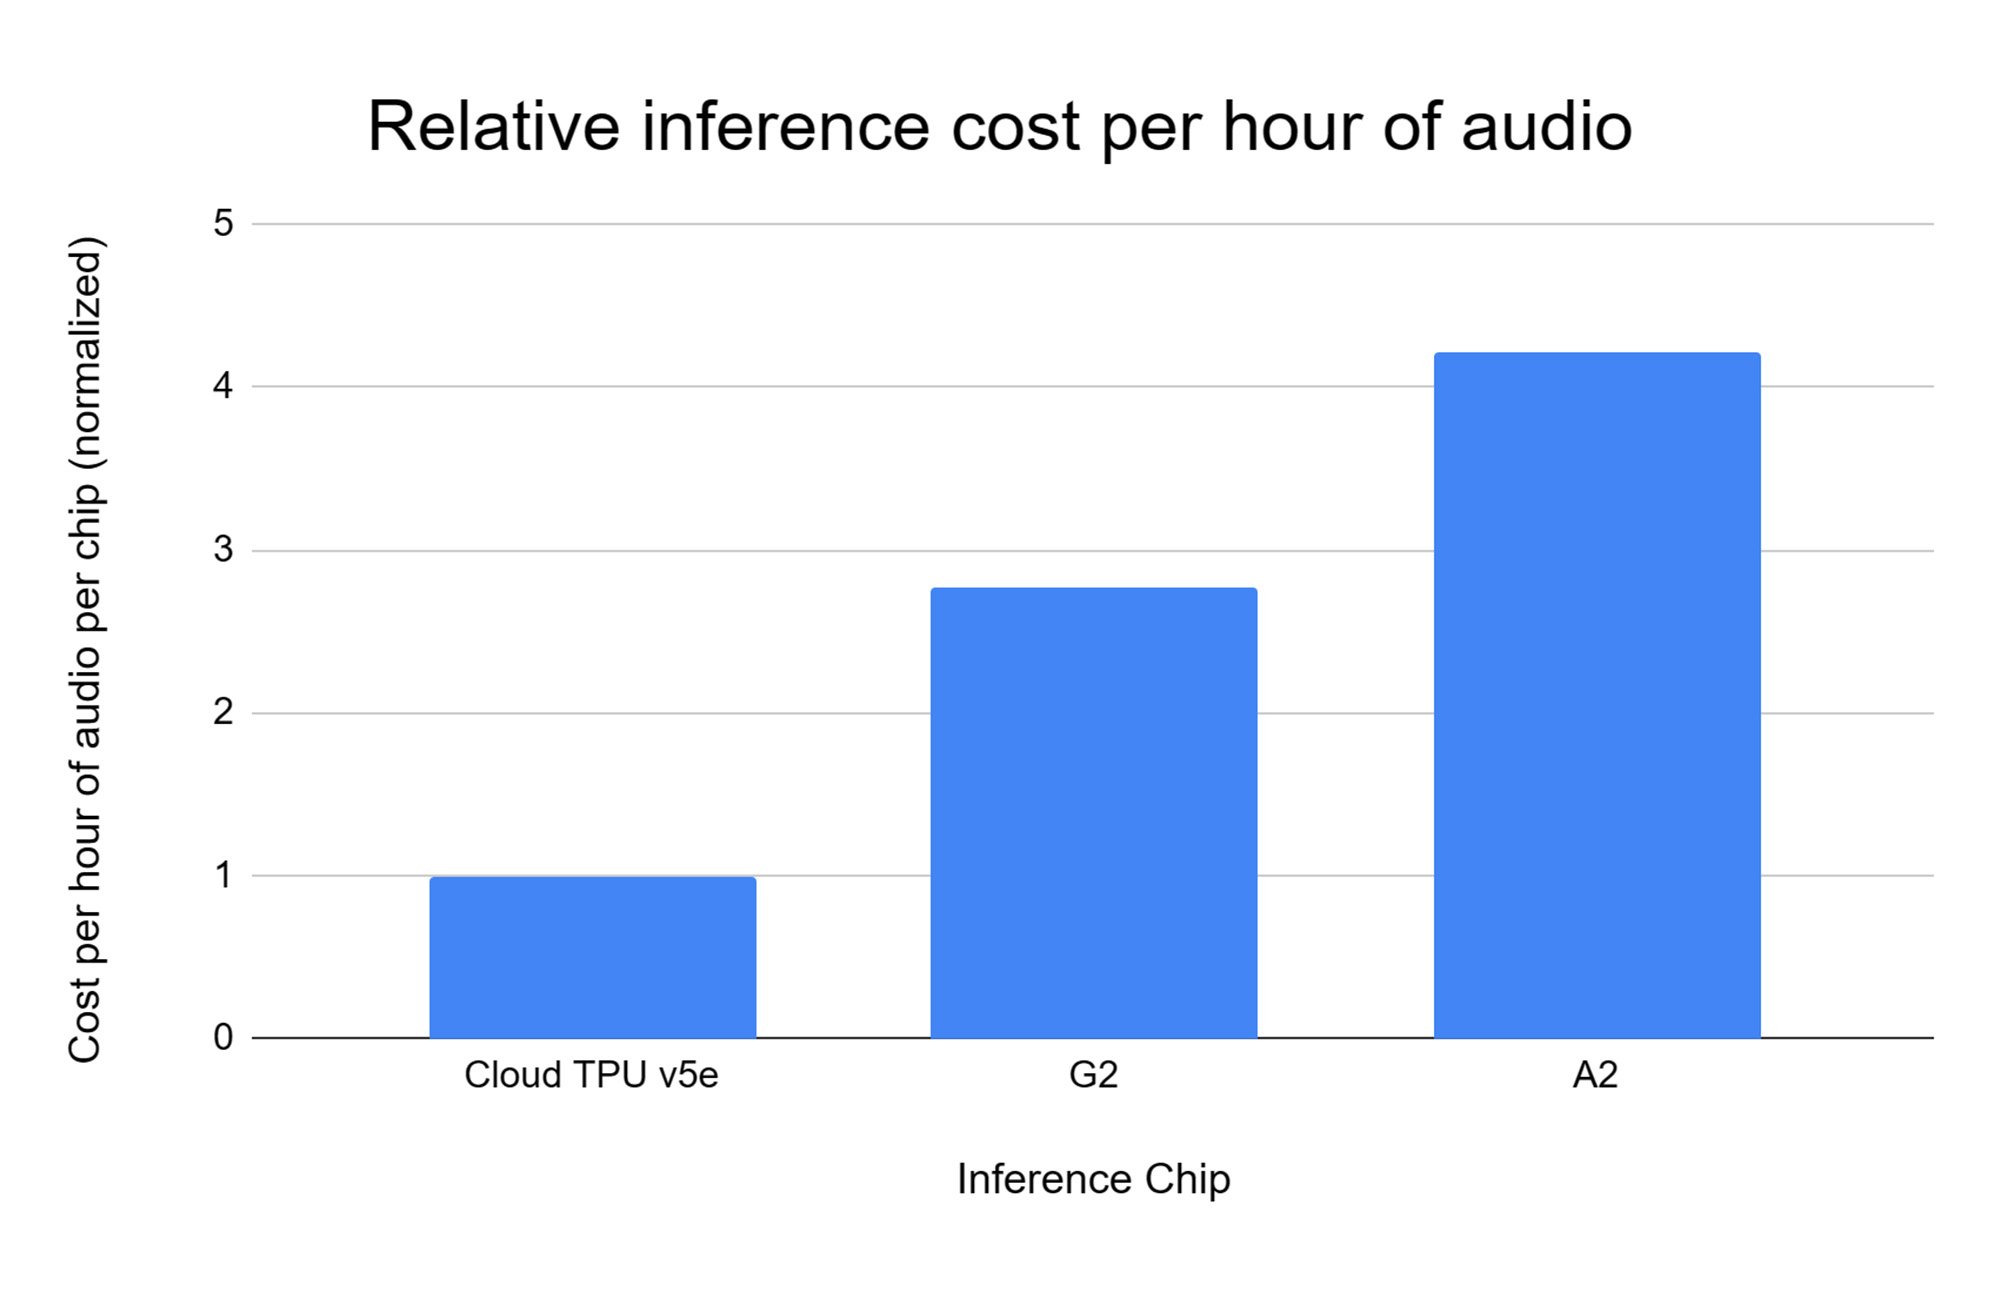 https://storage.googleapis.com/gweb-cloudblog-publish/images/2_Inference_cost_per_hour_of_audio.max-2000x2000.jpg